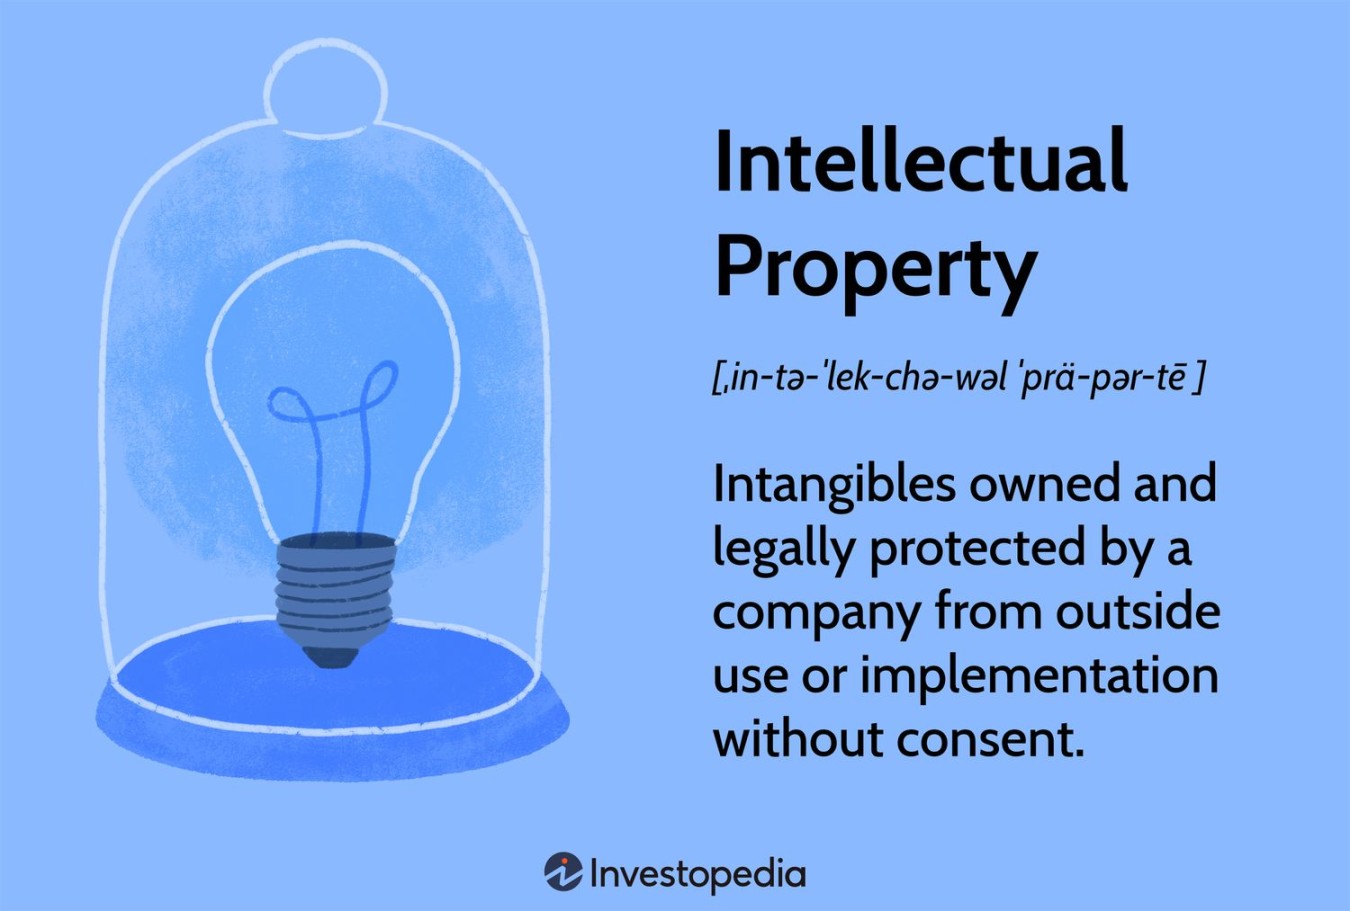 What Is Intellectual Property, and What Are Some Types?